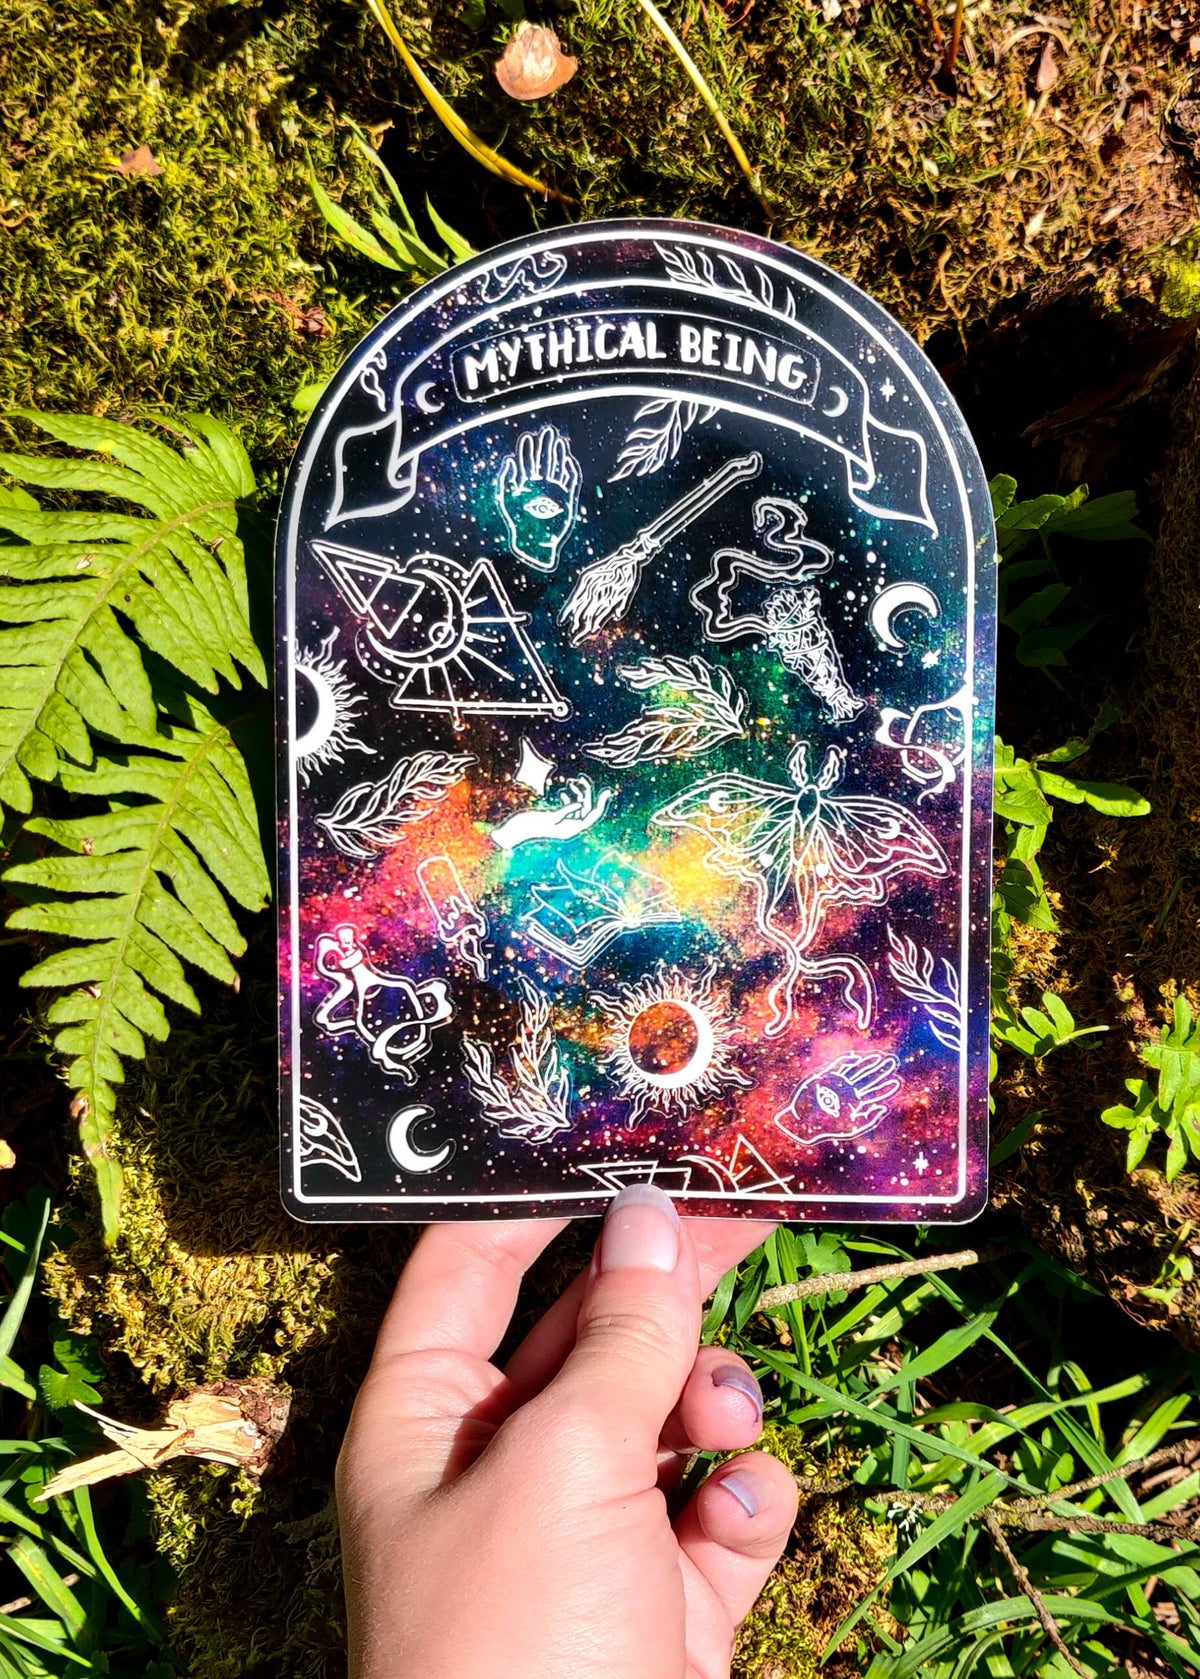 Mythical Being Sticker Sheet